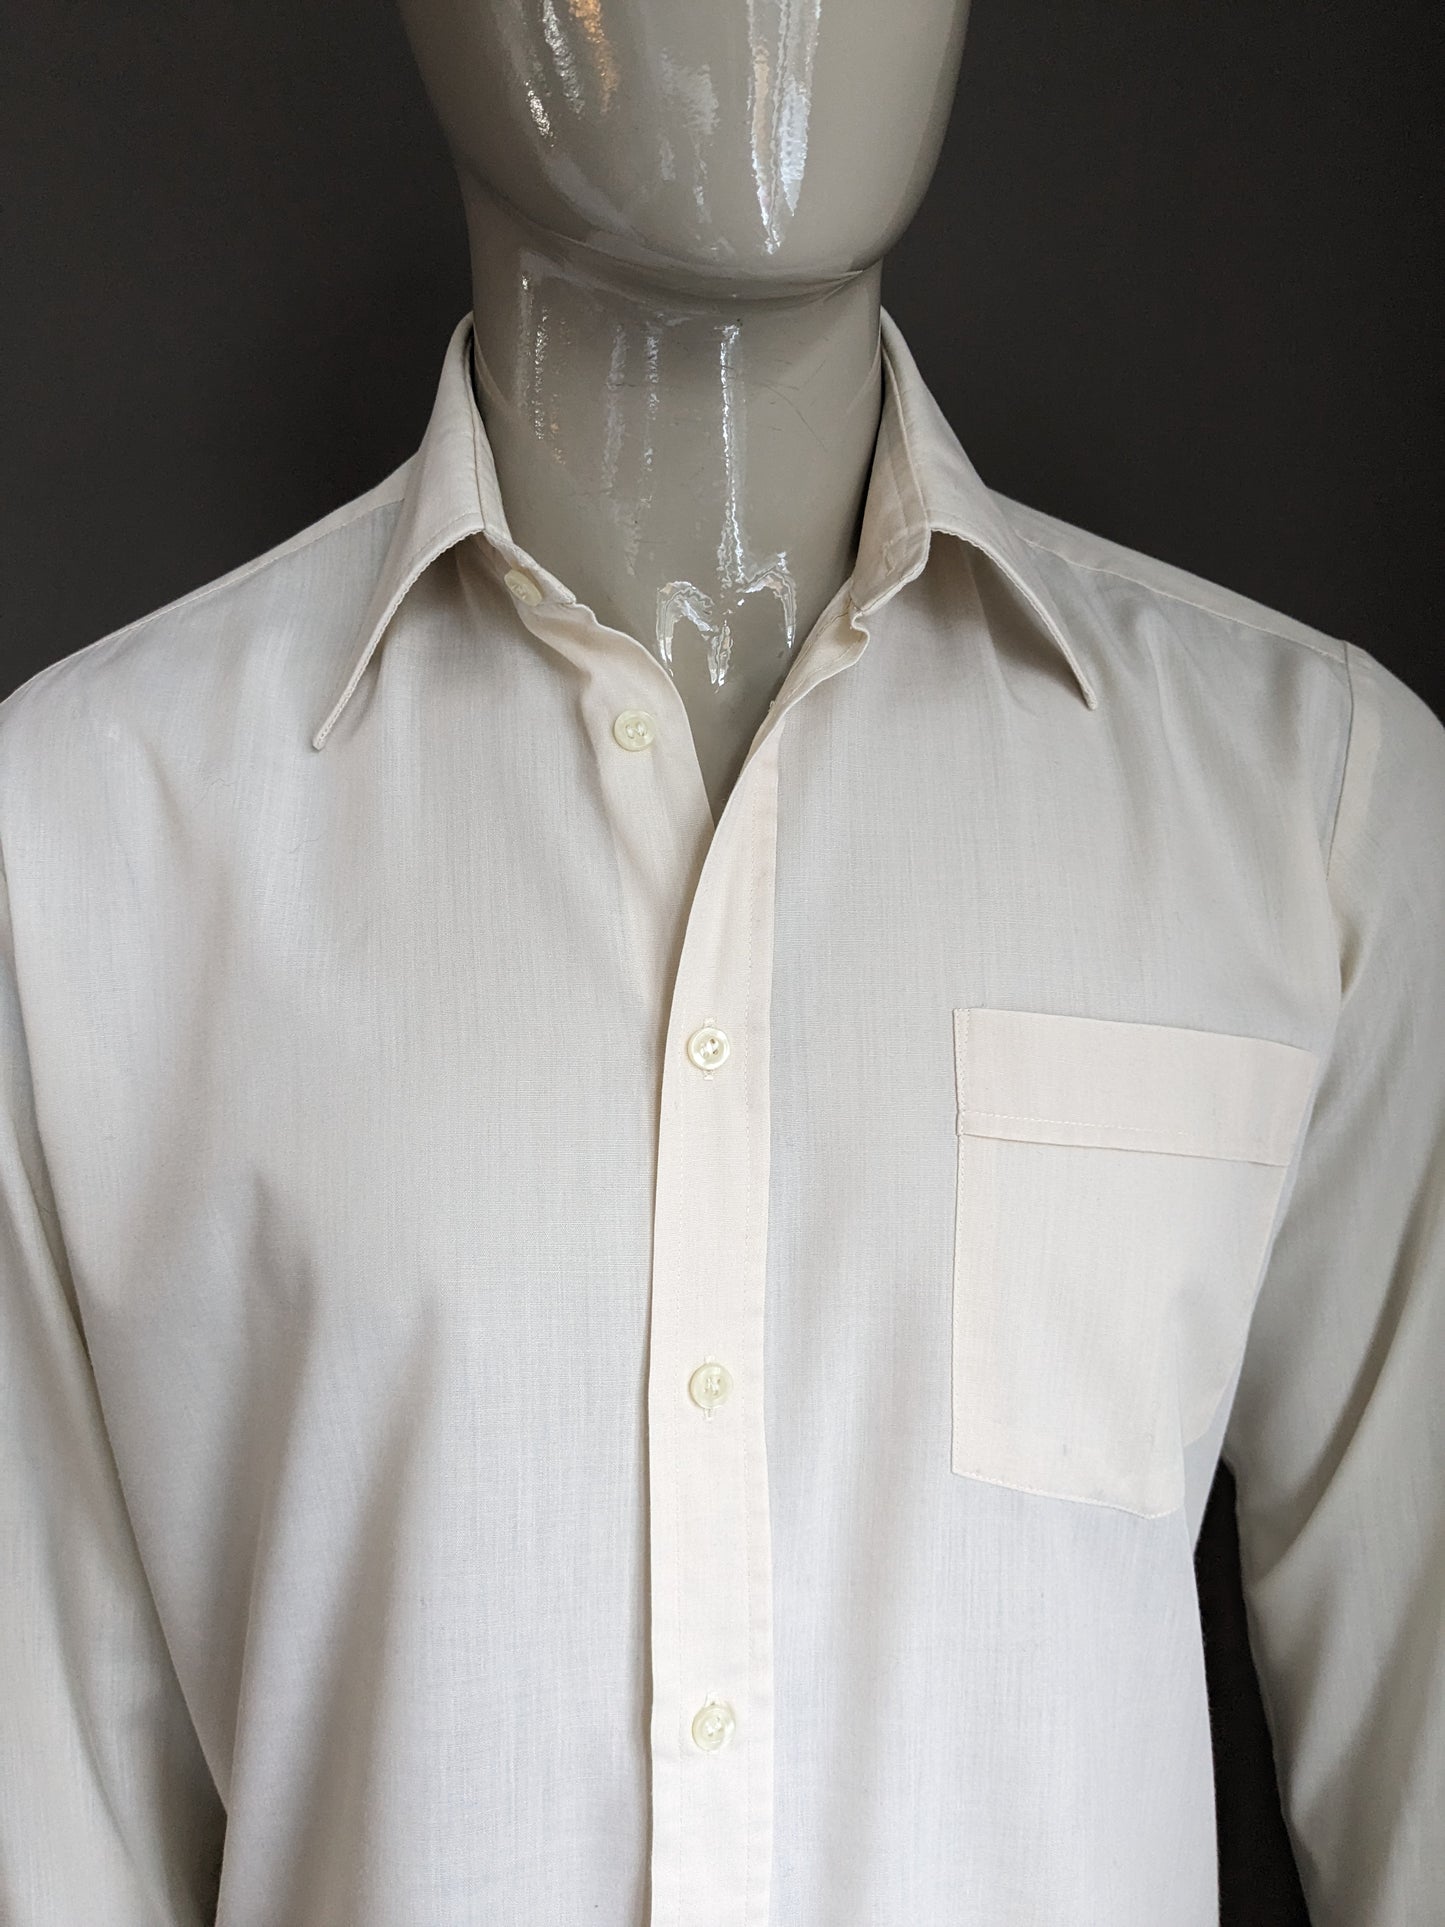 Vintage 70's shirt with point collar. Beige colored. Size XL.